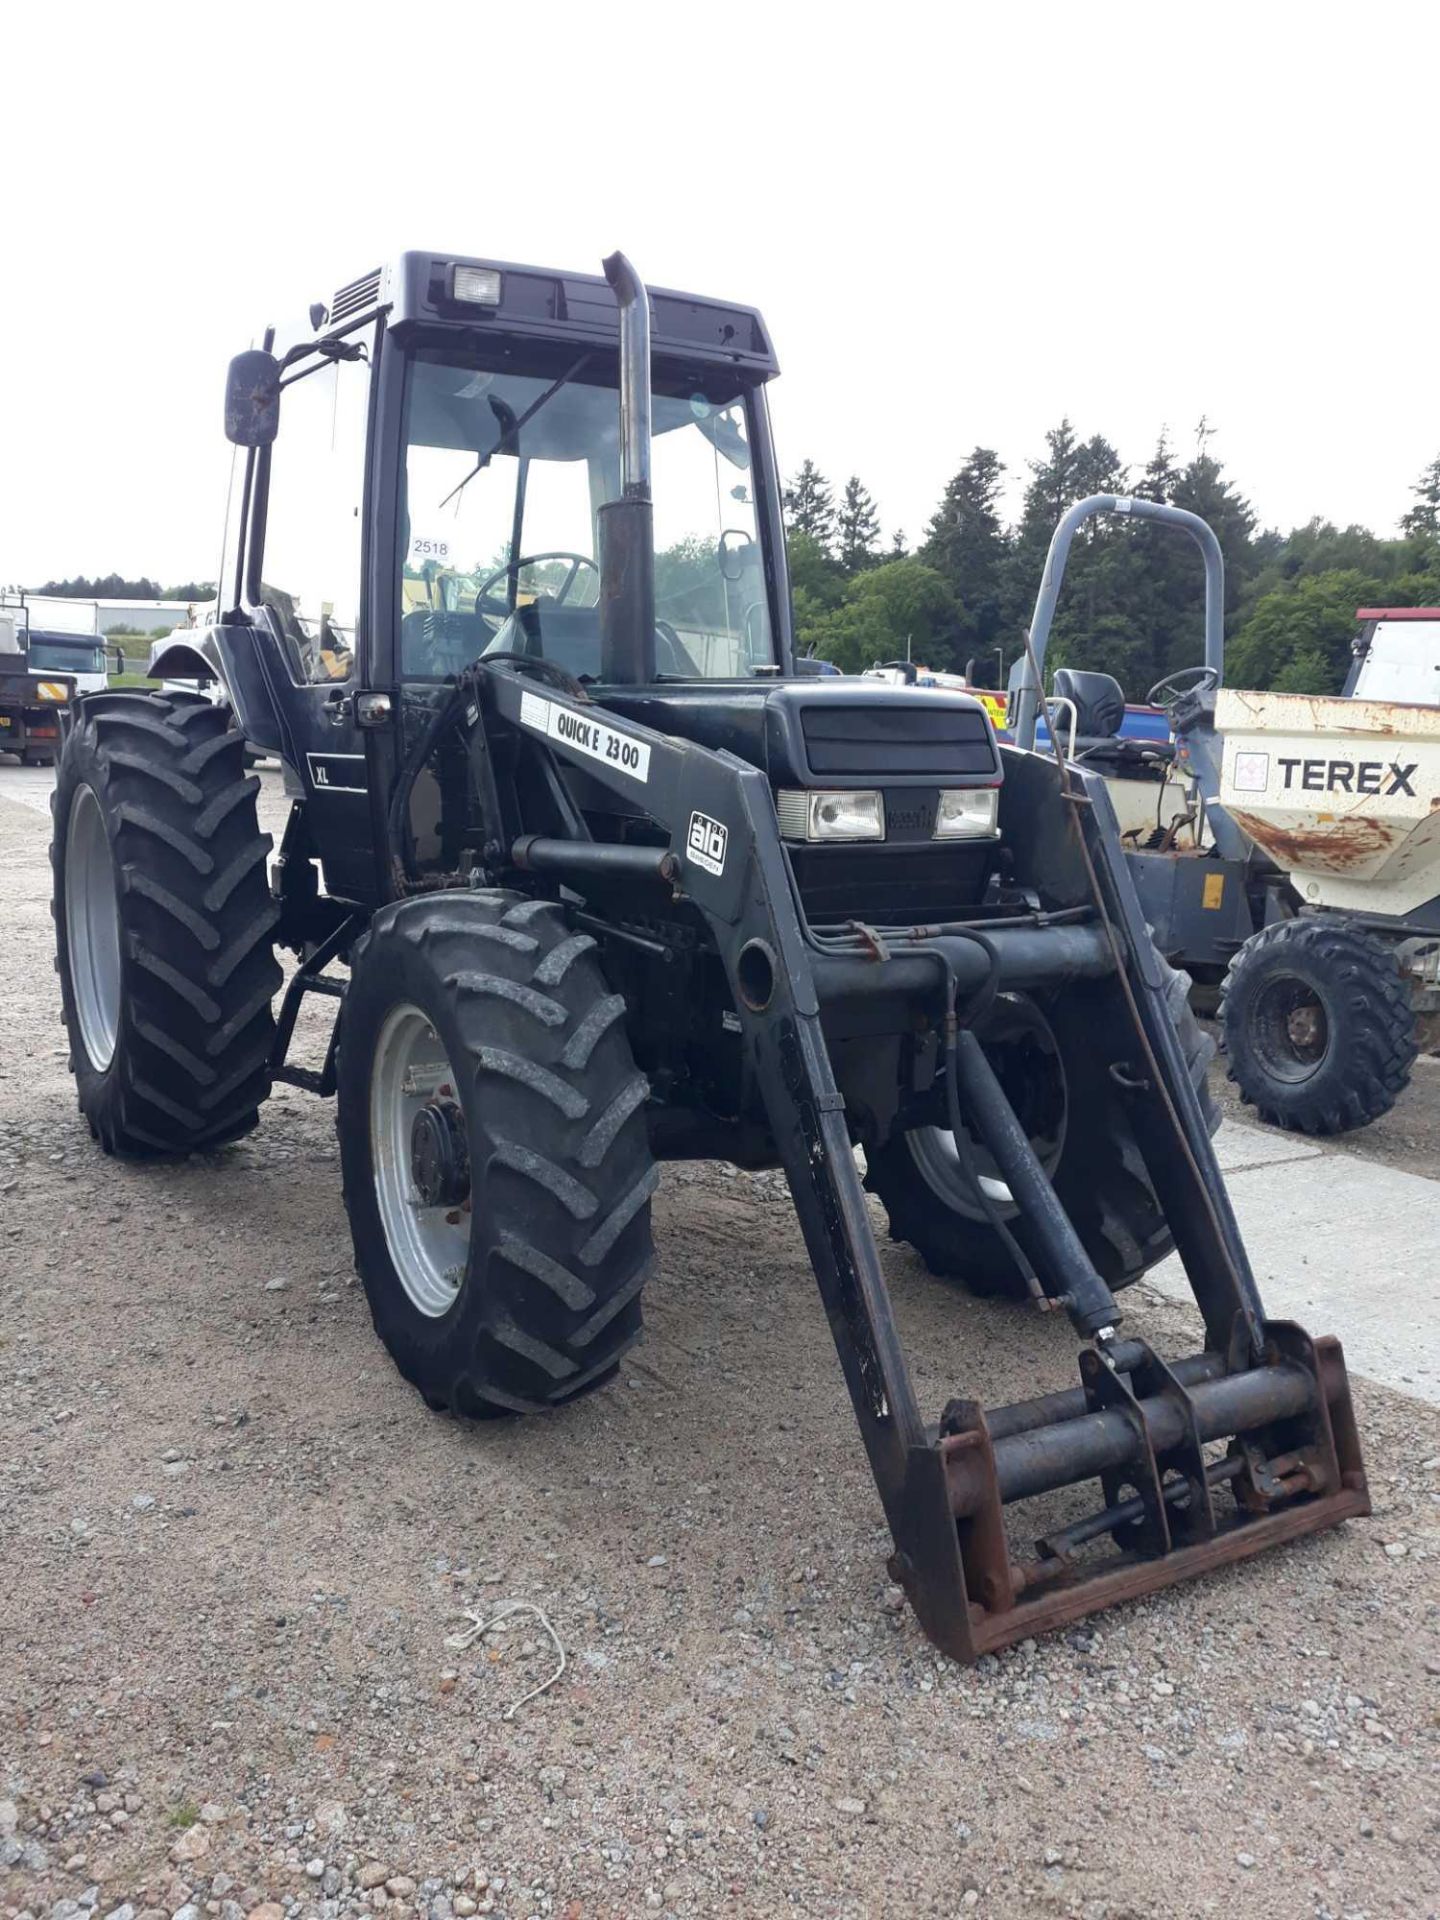 Case International 895XL - 0cc Tractor - Image 4 of 4